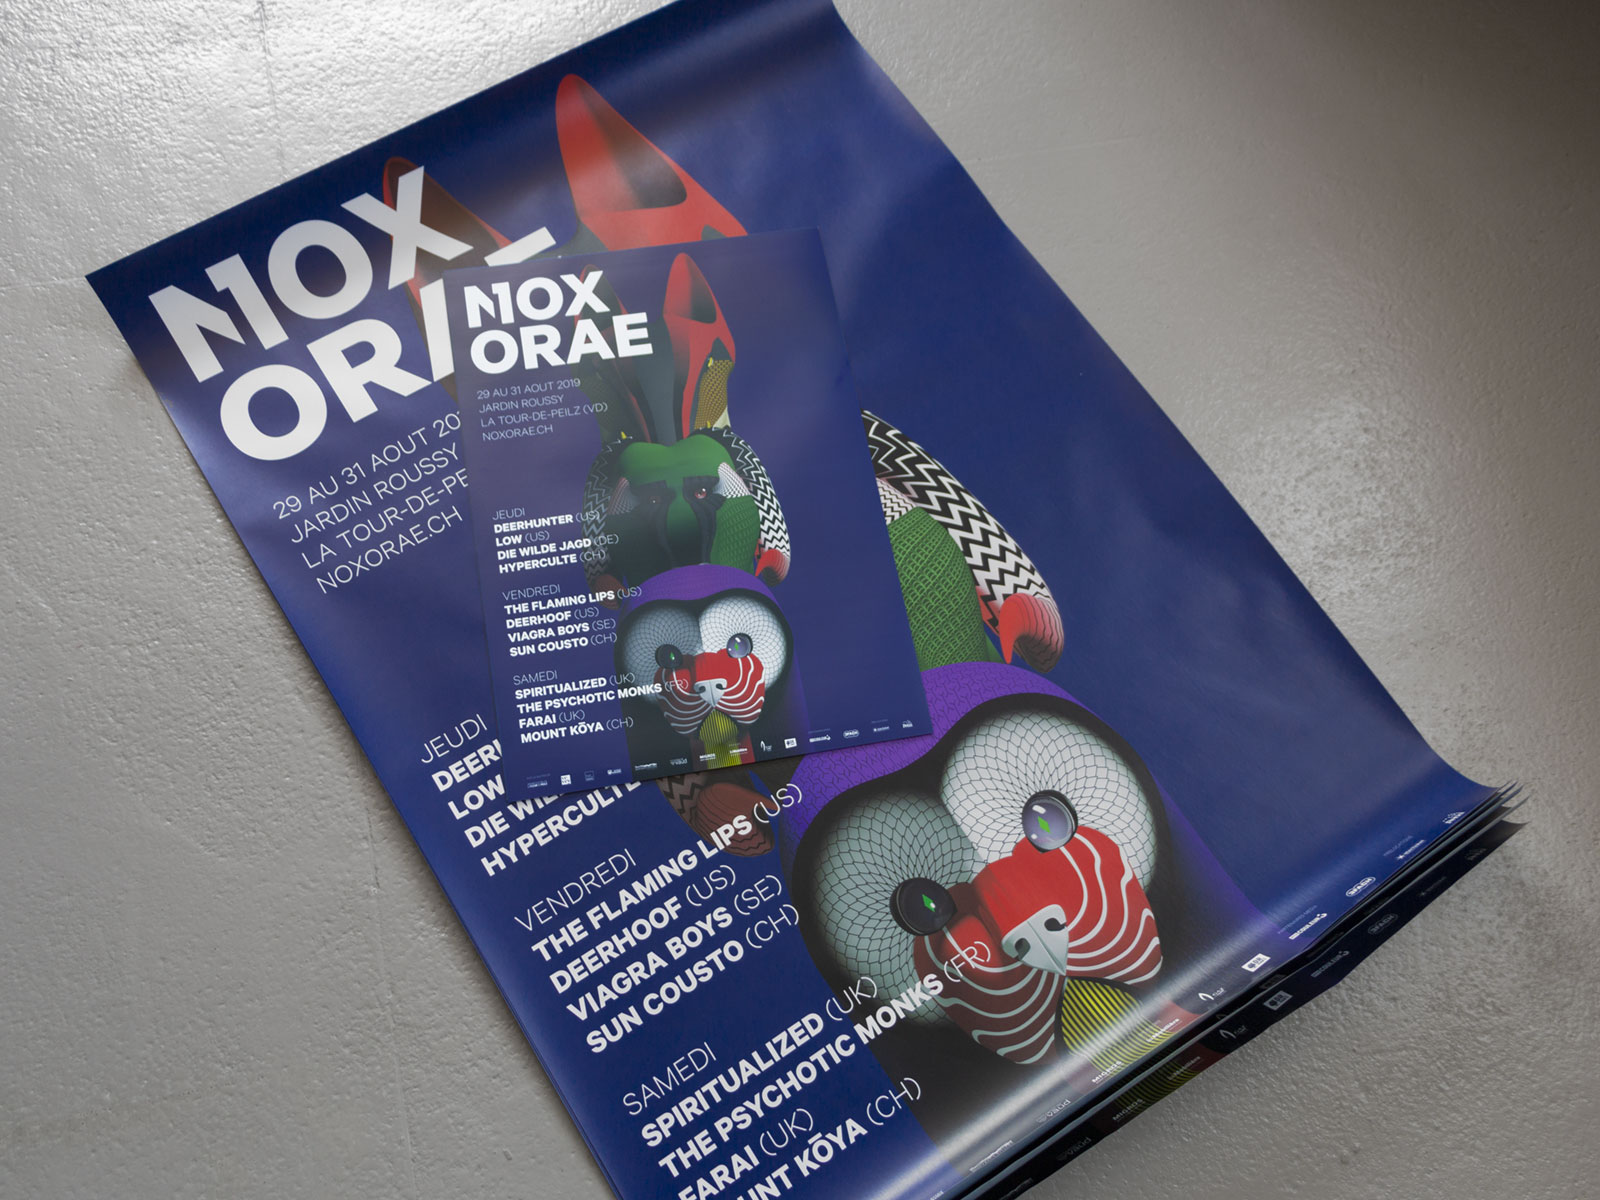 Nox Orae 2019, F4 and A2 posters | © AG